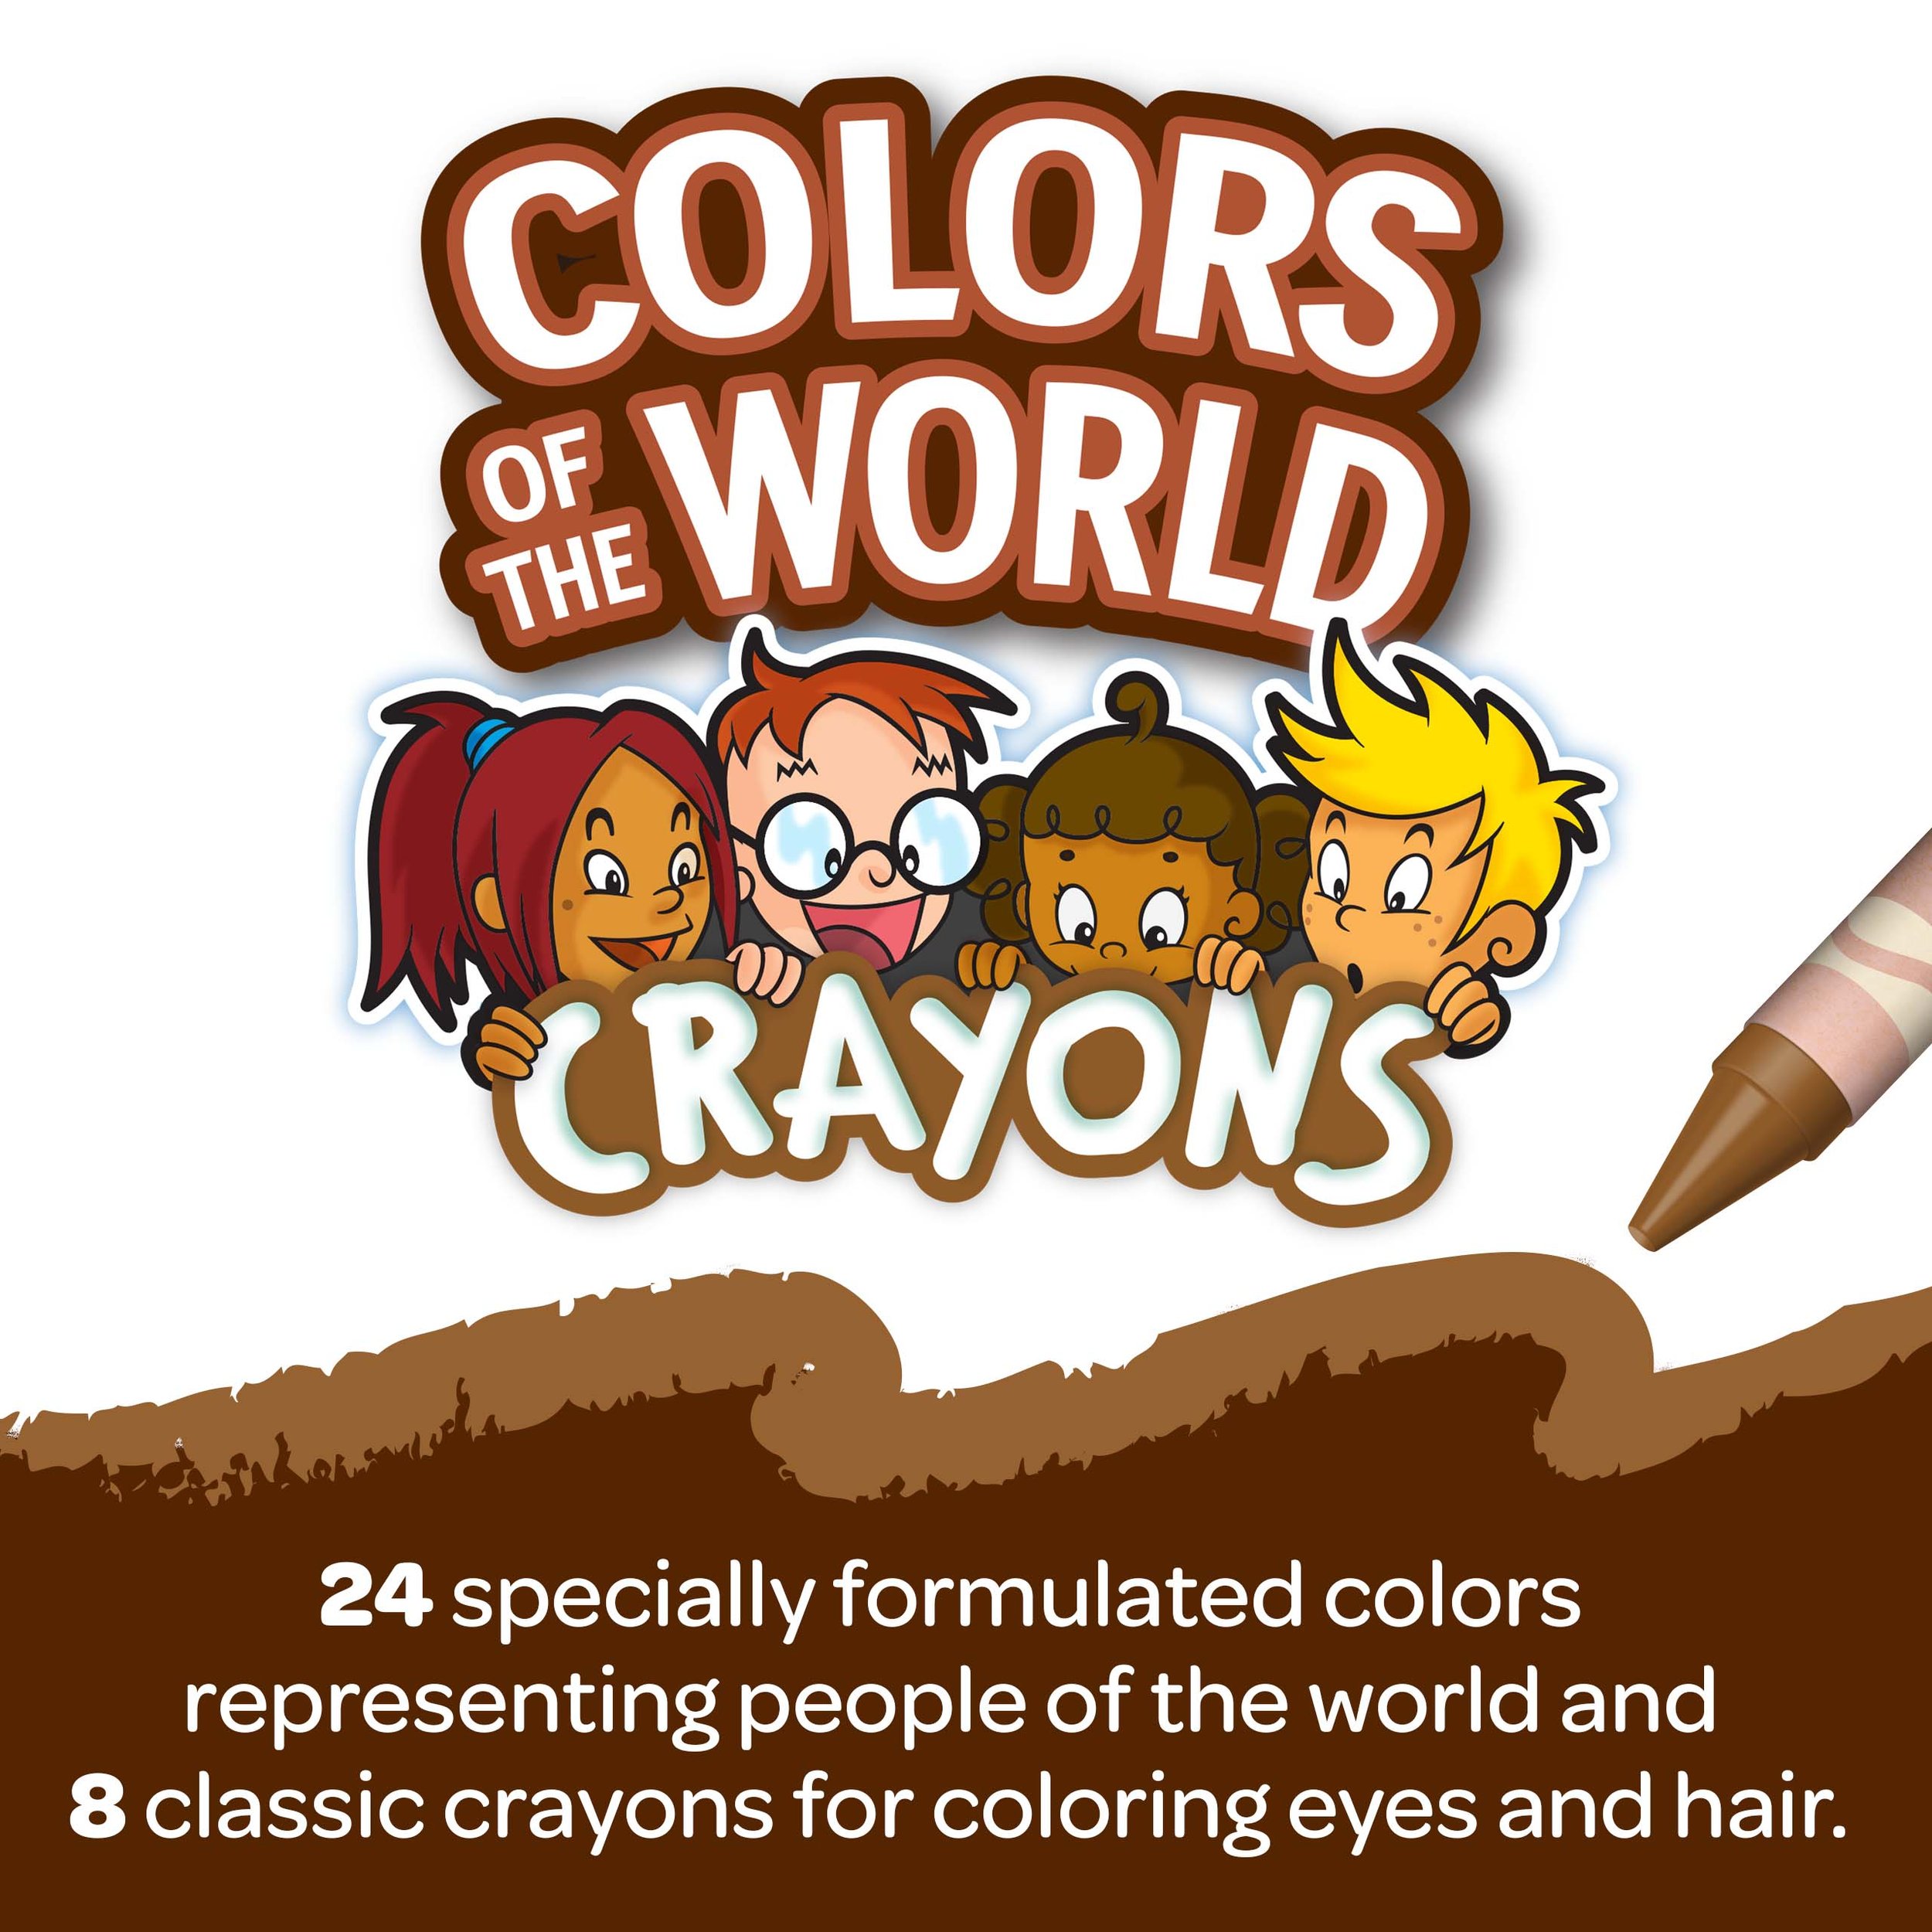 52-0110 - Colors of the World Crayons 32CT_04.jpg